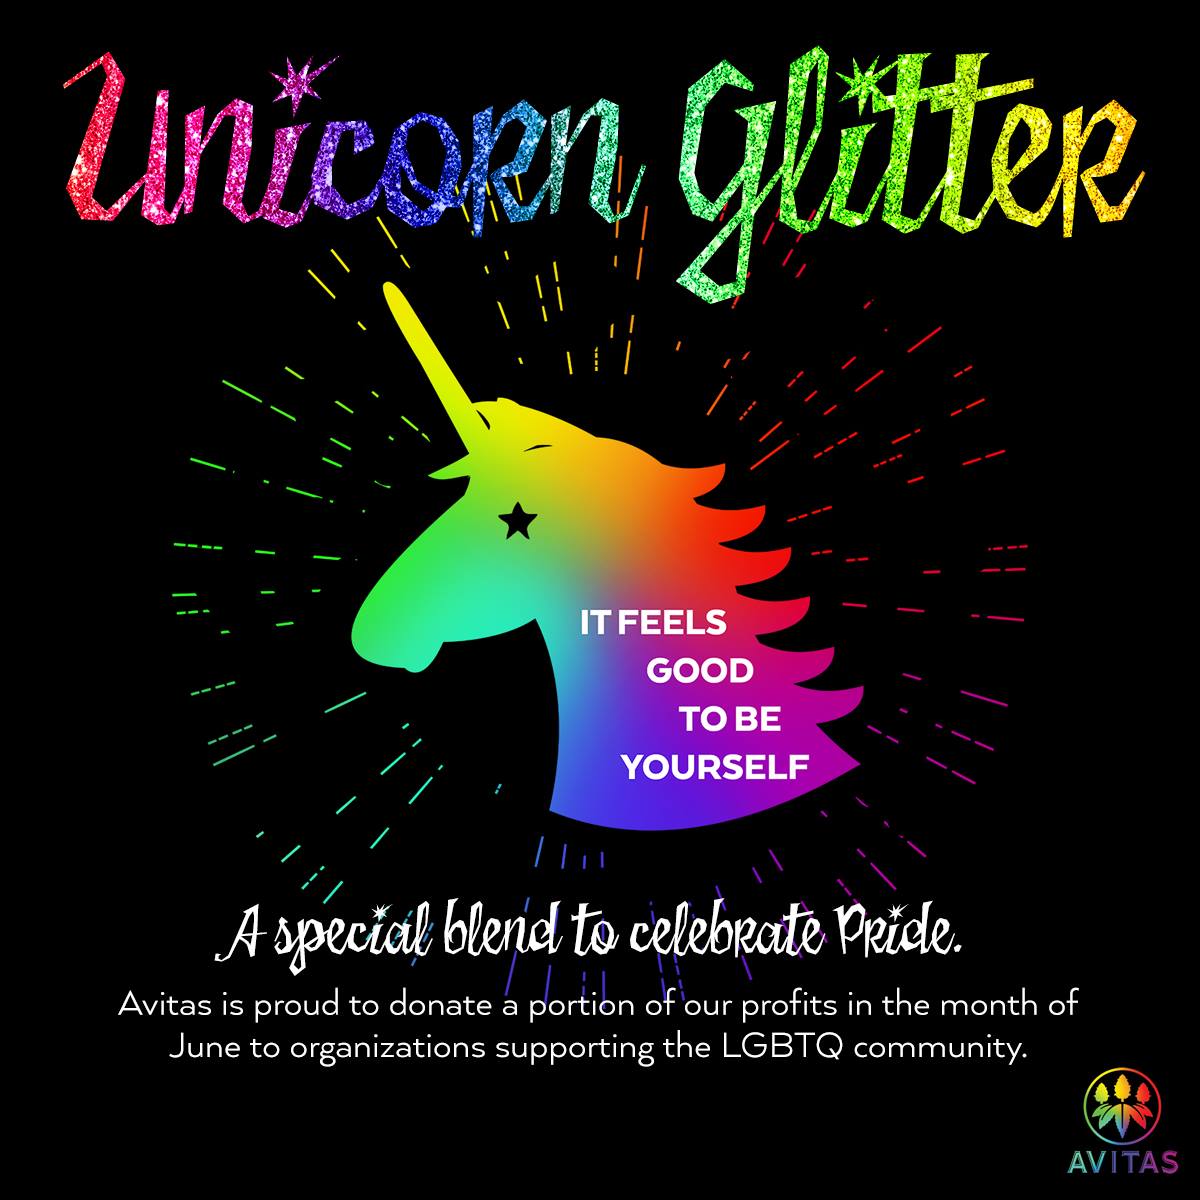 Why You Should Order Unicorn Glitter From Avitas Online Today